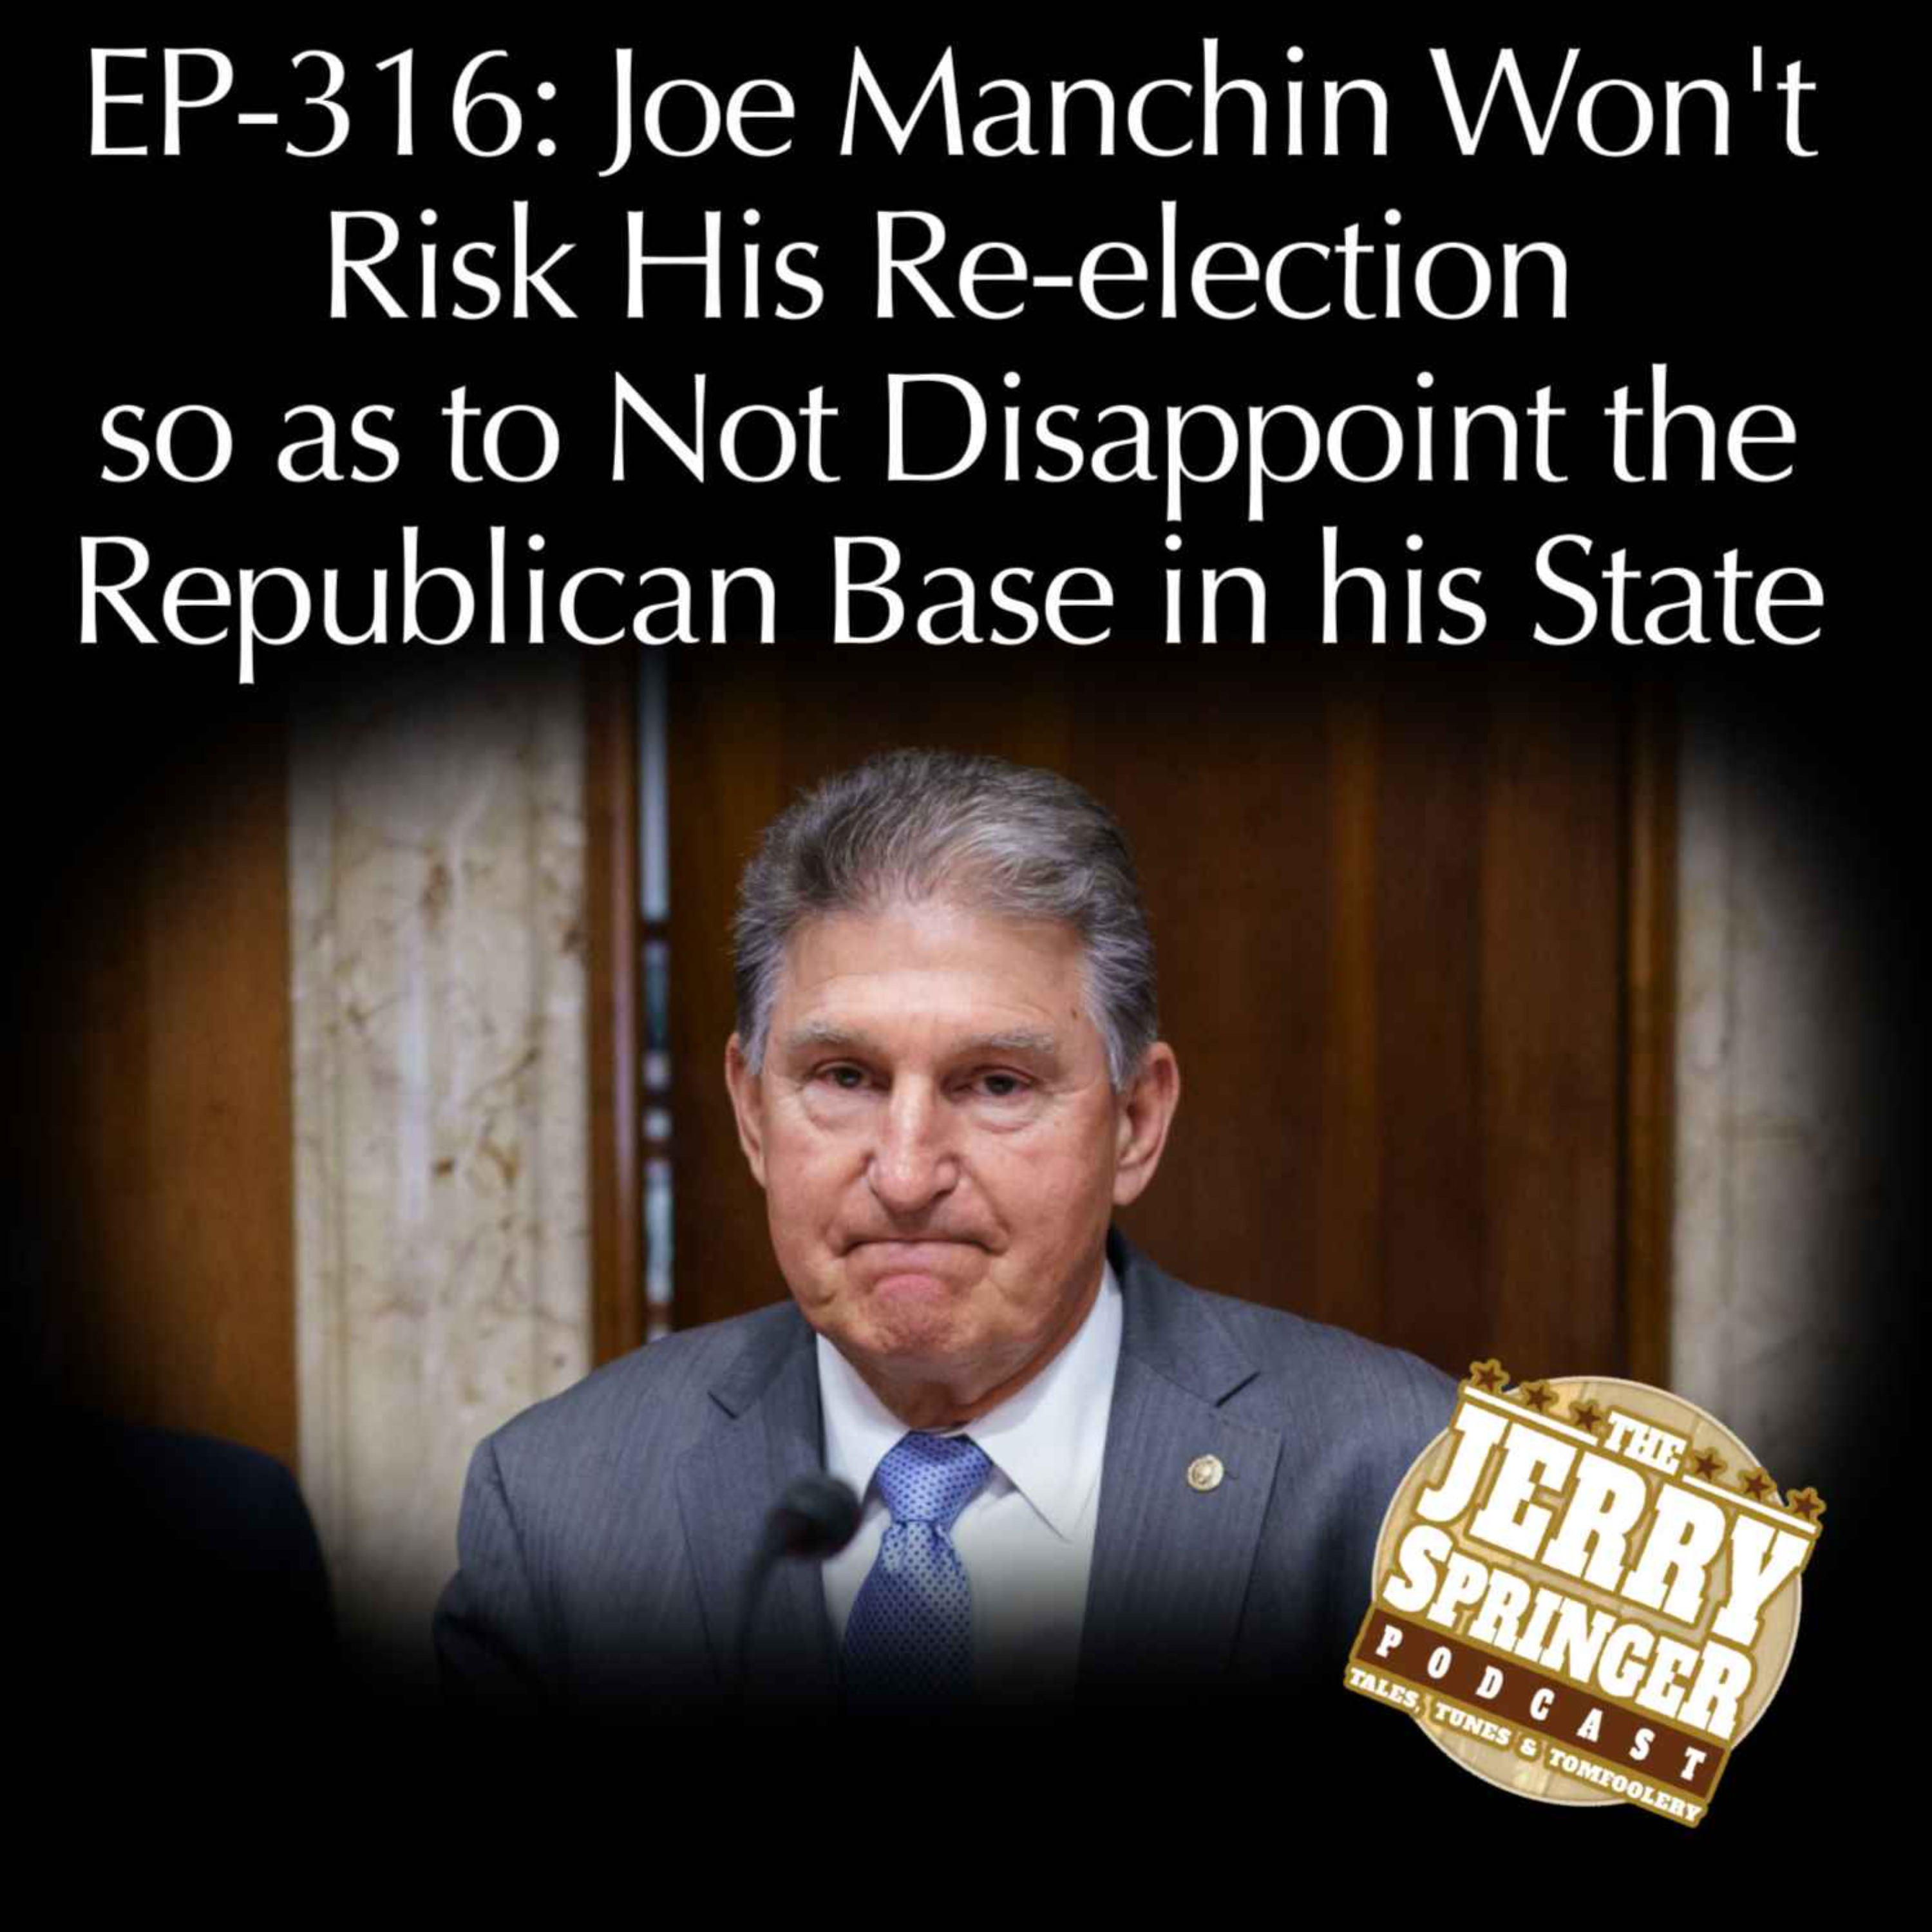 Joe Manchin Won't Risk his Re-election so as to Not Disappoint the Republican Base in his state: EP-316